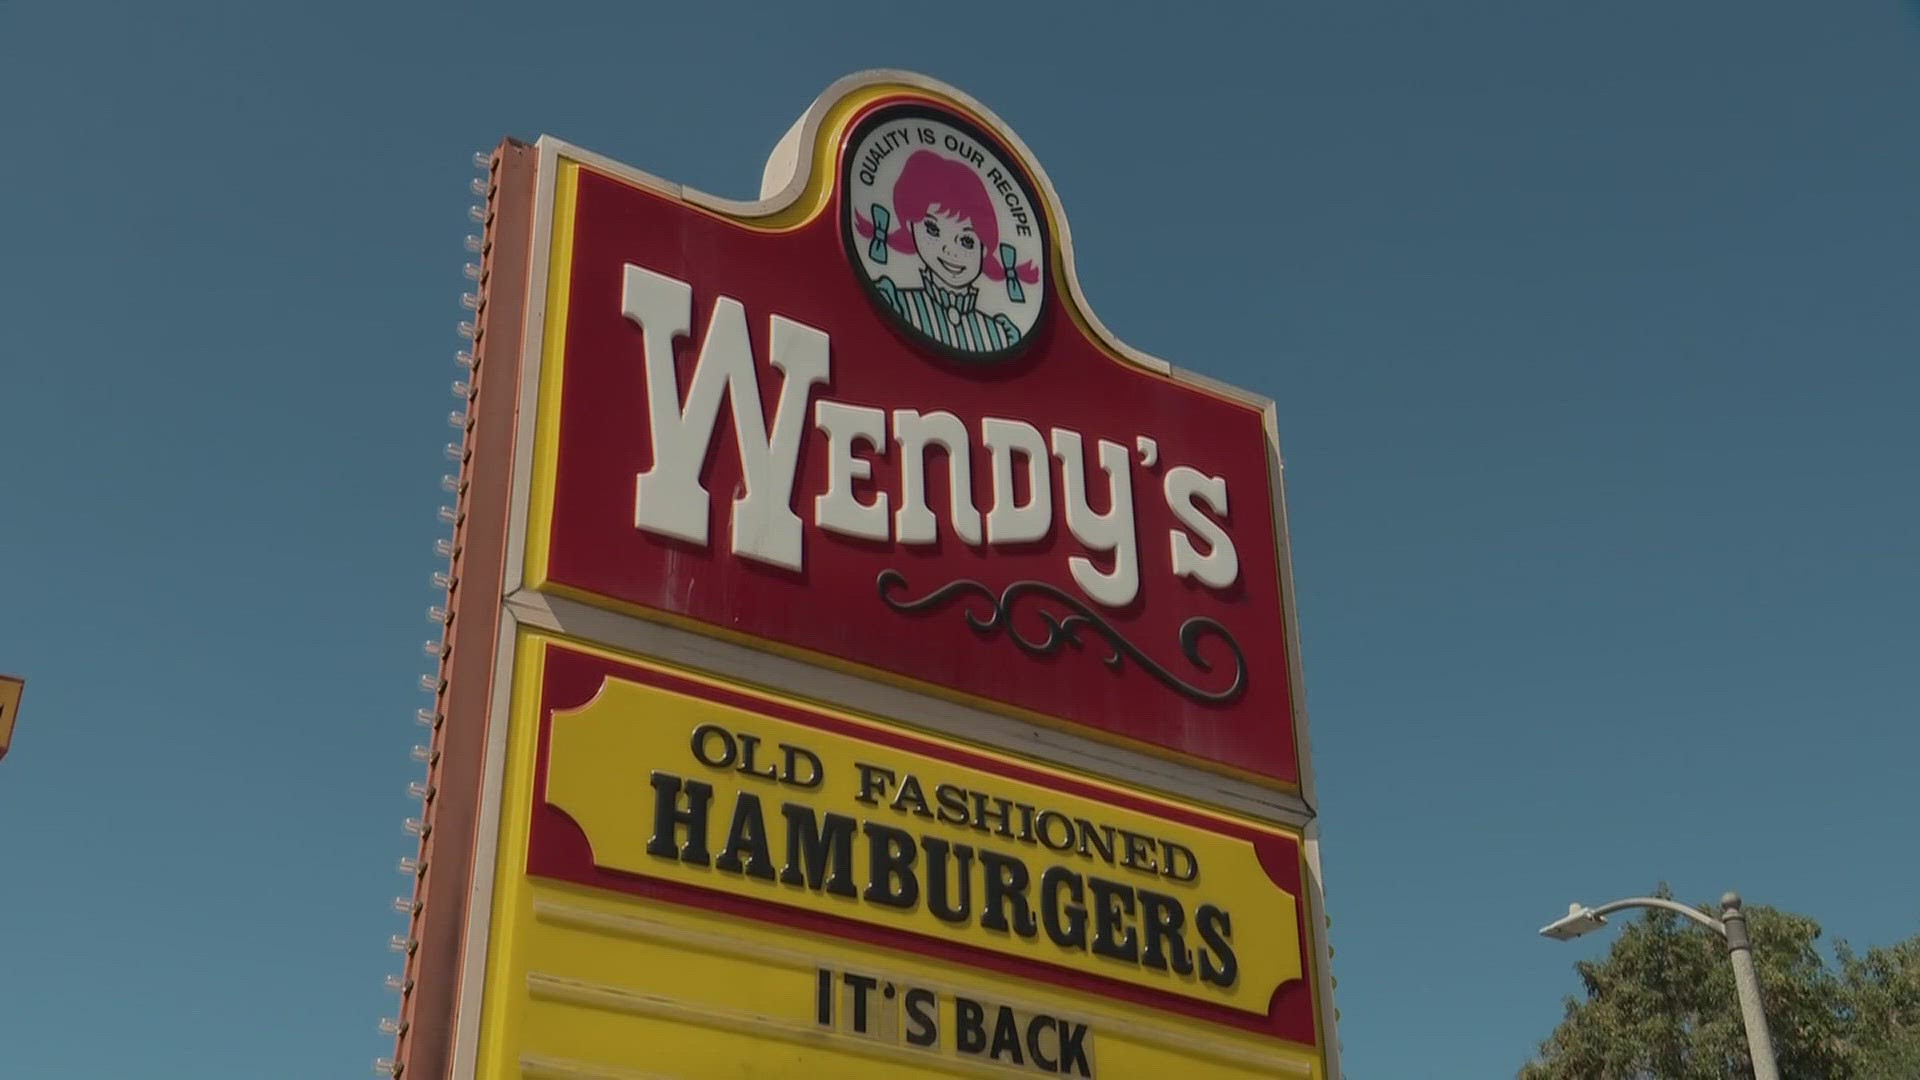 Wendy's has since clarified that it has no plans to raise menu prices when demand is highest.